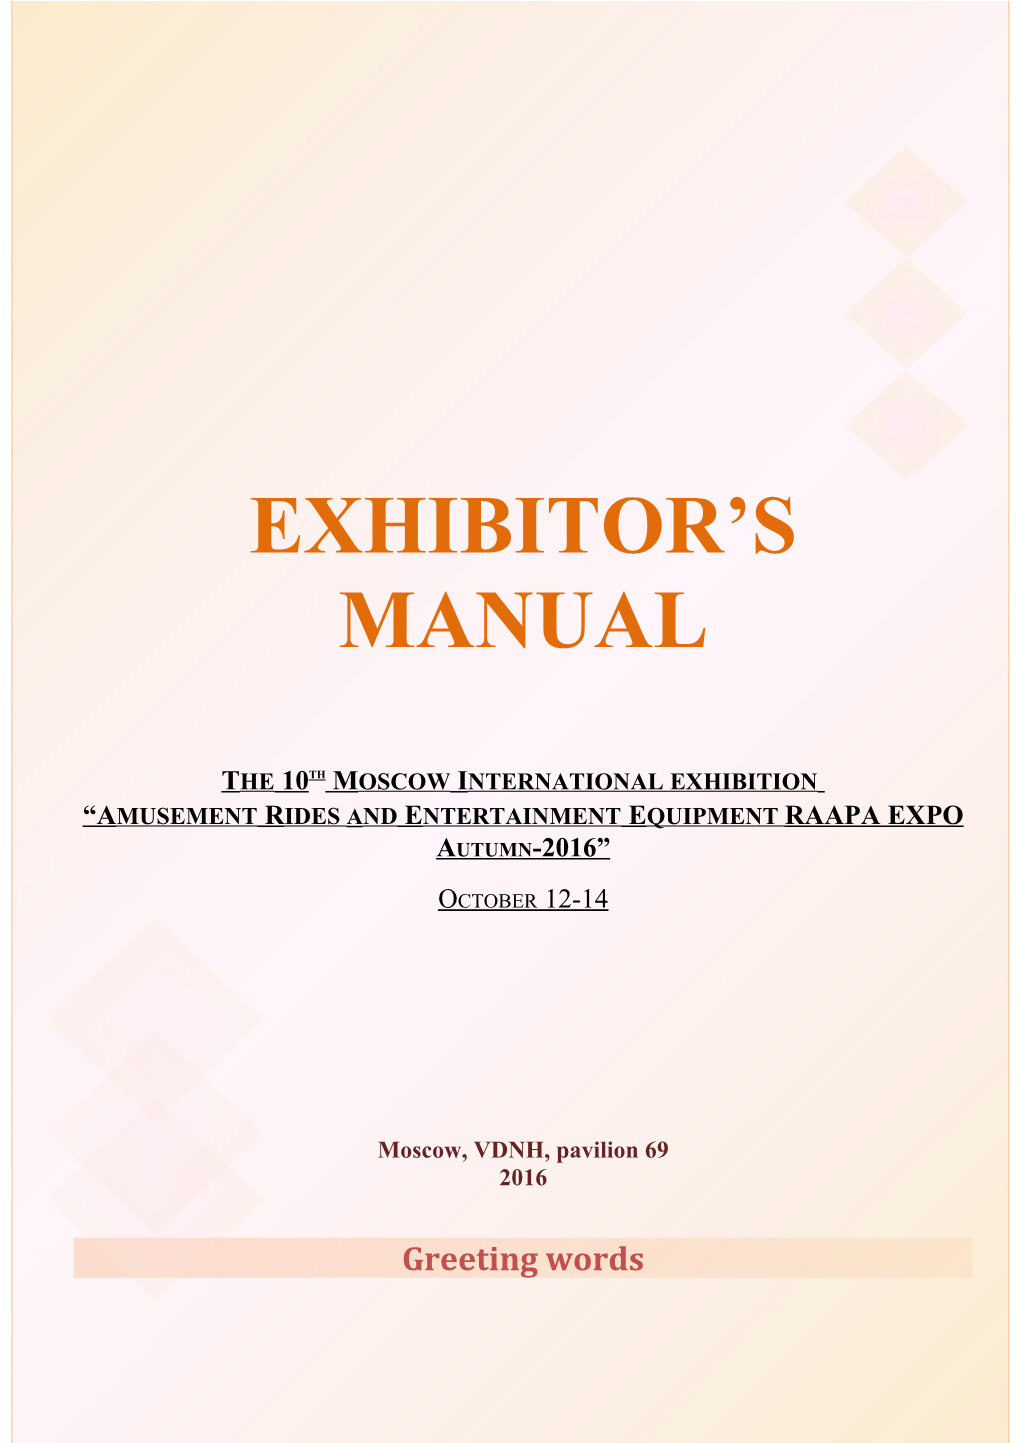 THE 10Th MOSCOW INTERNATIONAL EXHIBITION